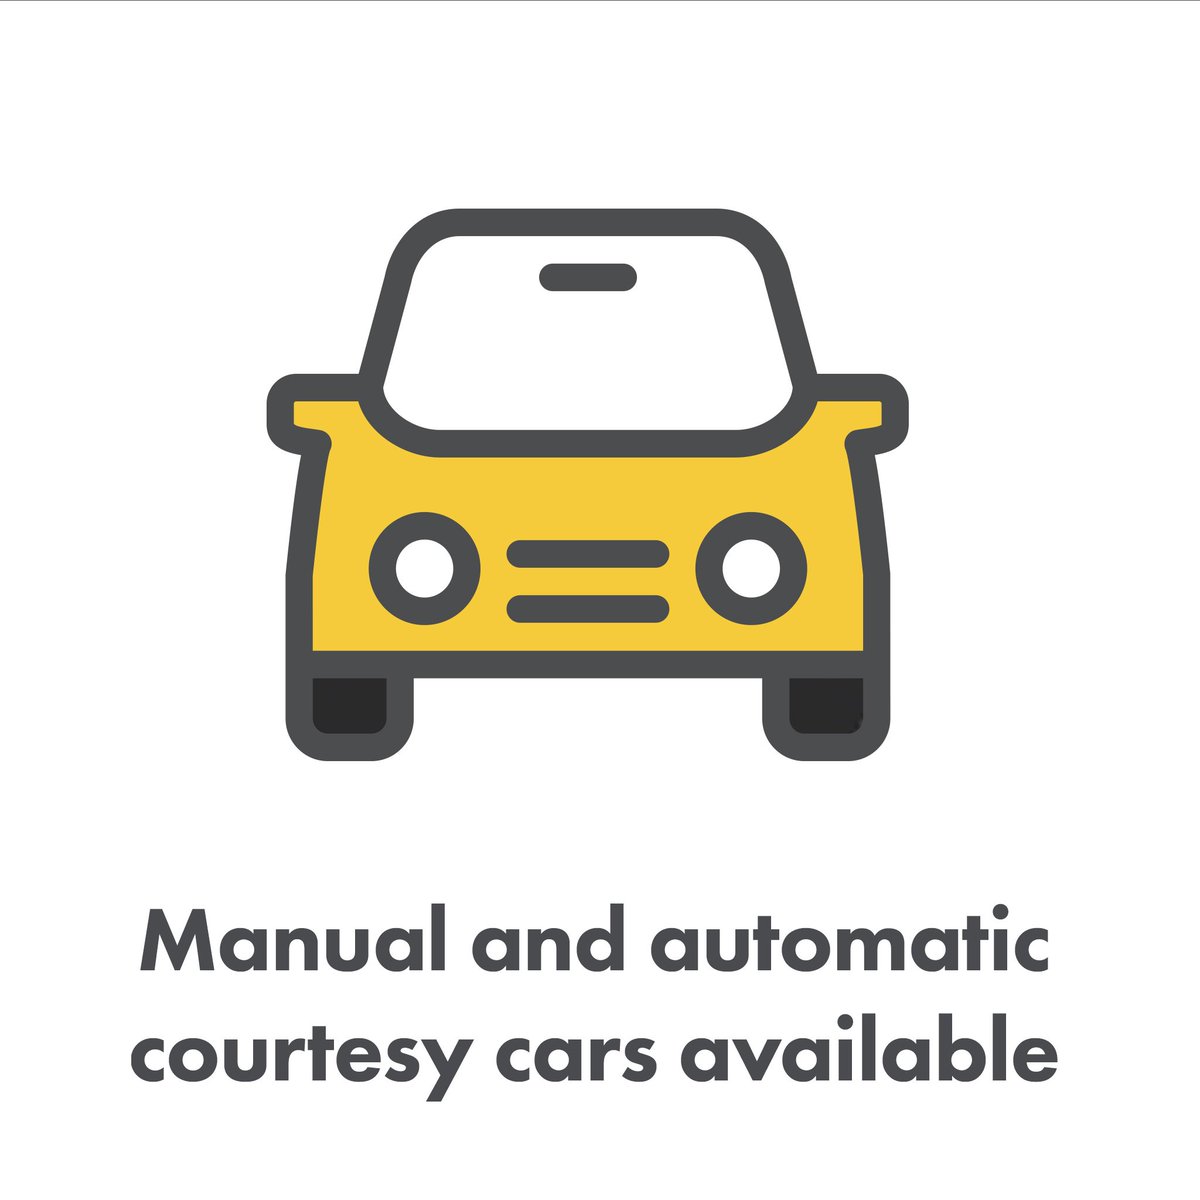 We have manual and automatic courtesy cars available to fit any driver while your car is being repaired by us. #carbodyrepair #dentrepair #alloywheelrepair #scratchrepair